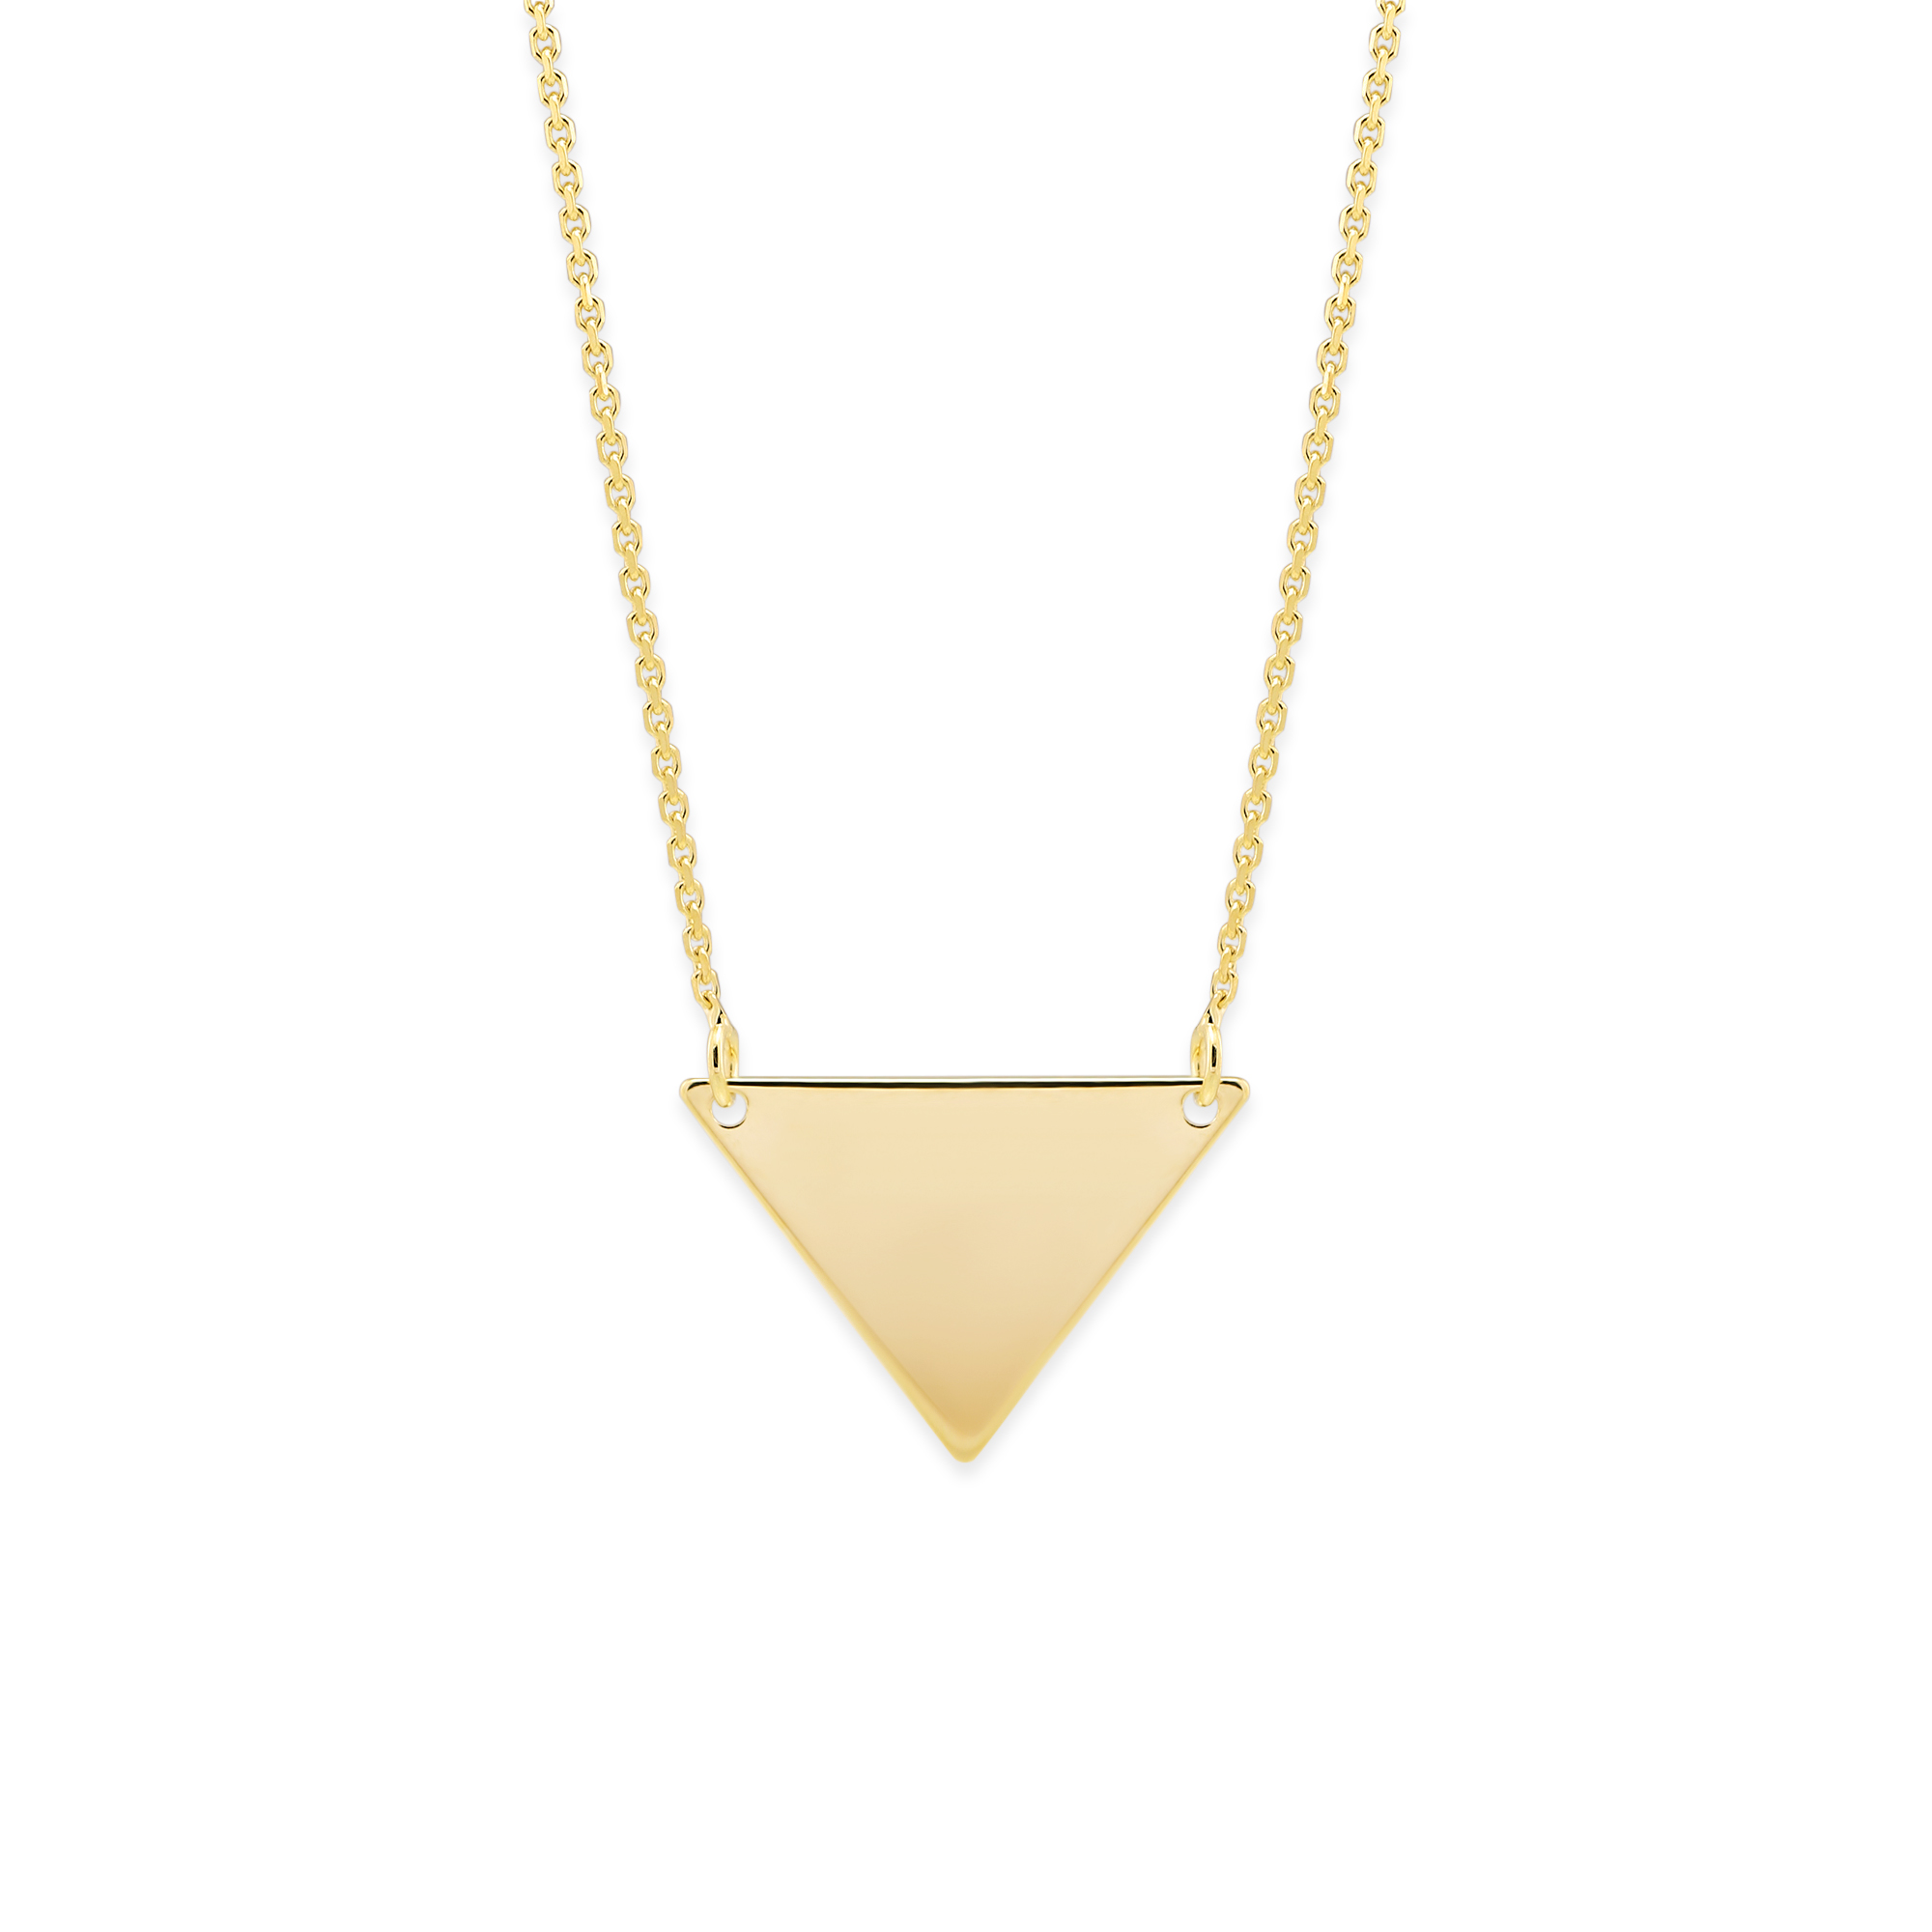 14K Yellow Gold Triangle Necklace, 18" | Borsheims